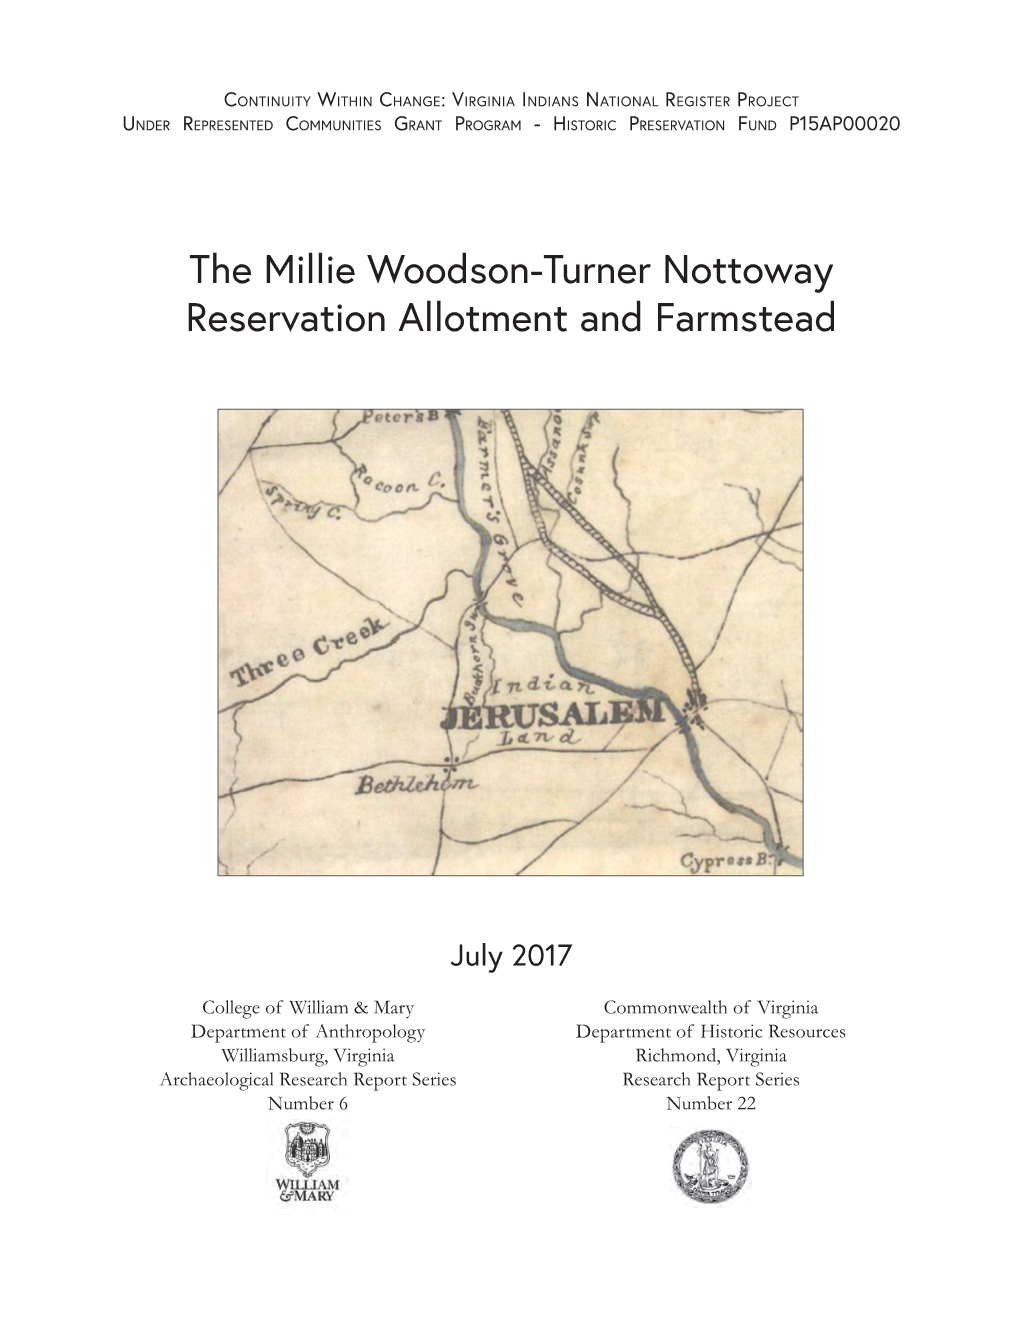 The Millie Woodson-Turner Nottoway Reservation Allotment and Farmstead